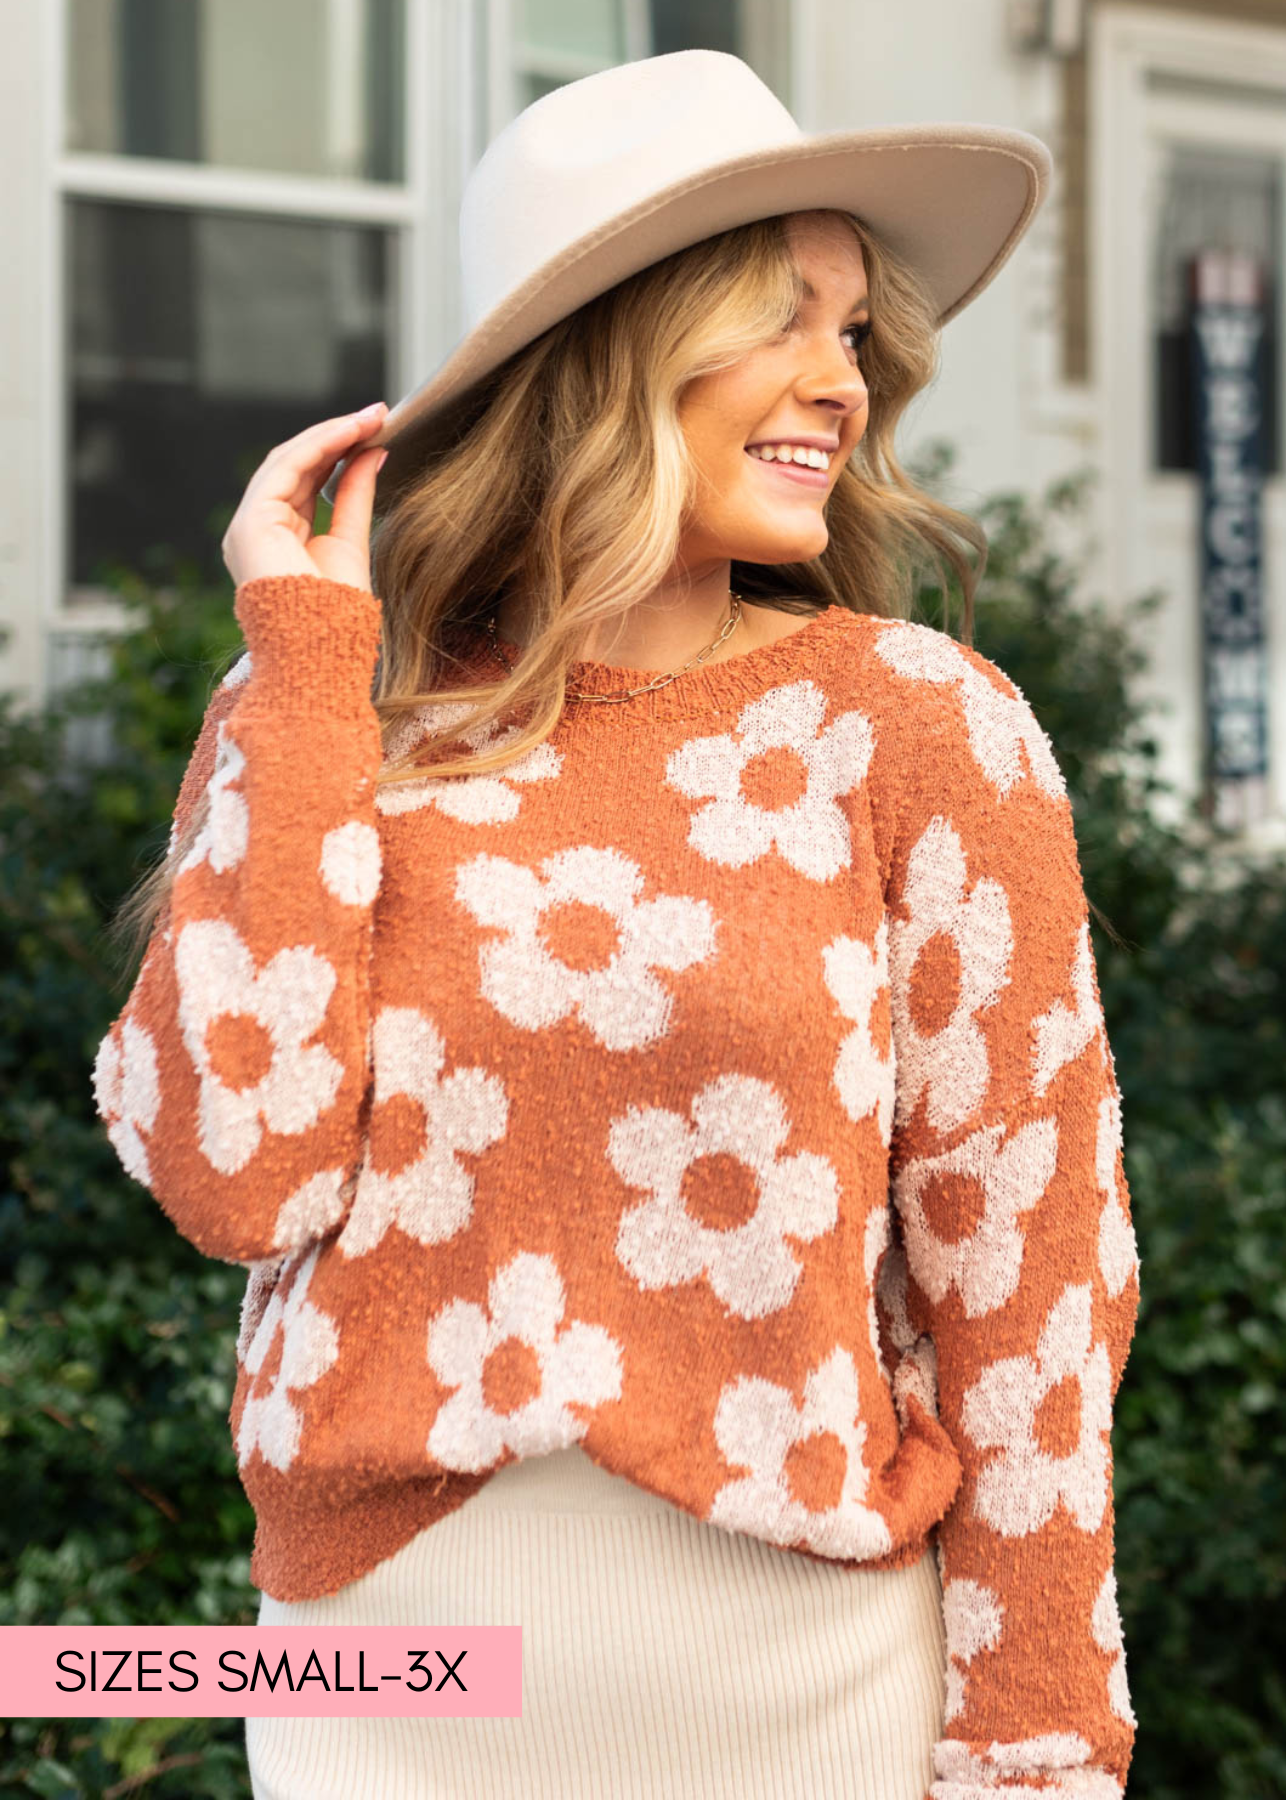 Caramel sweater with a daisy print